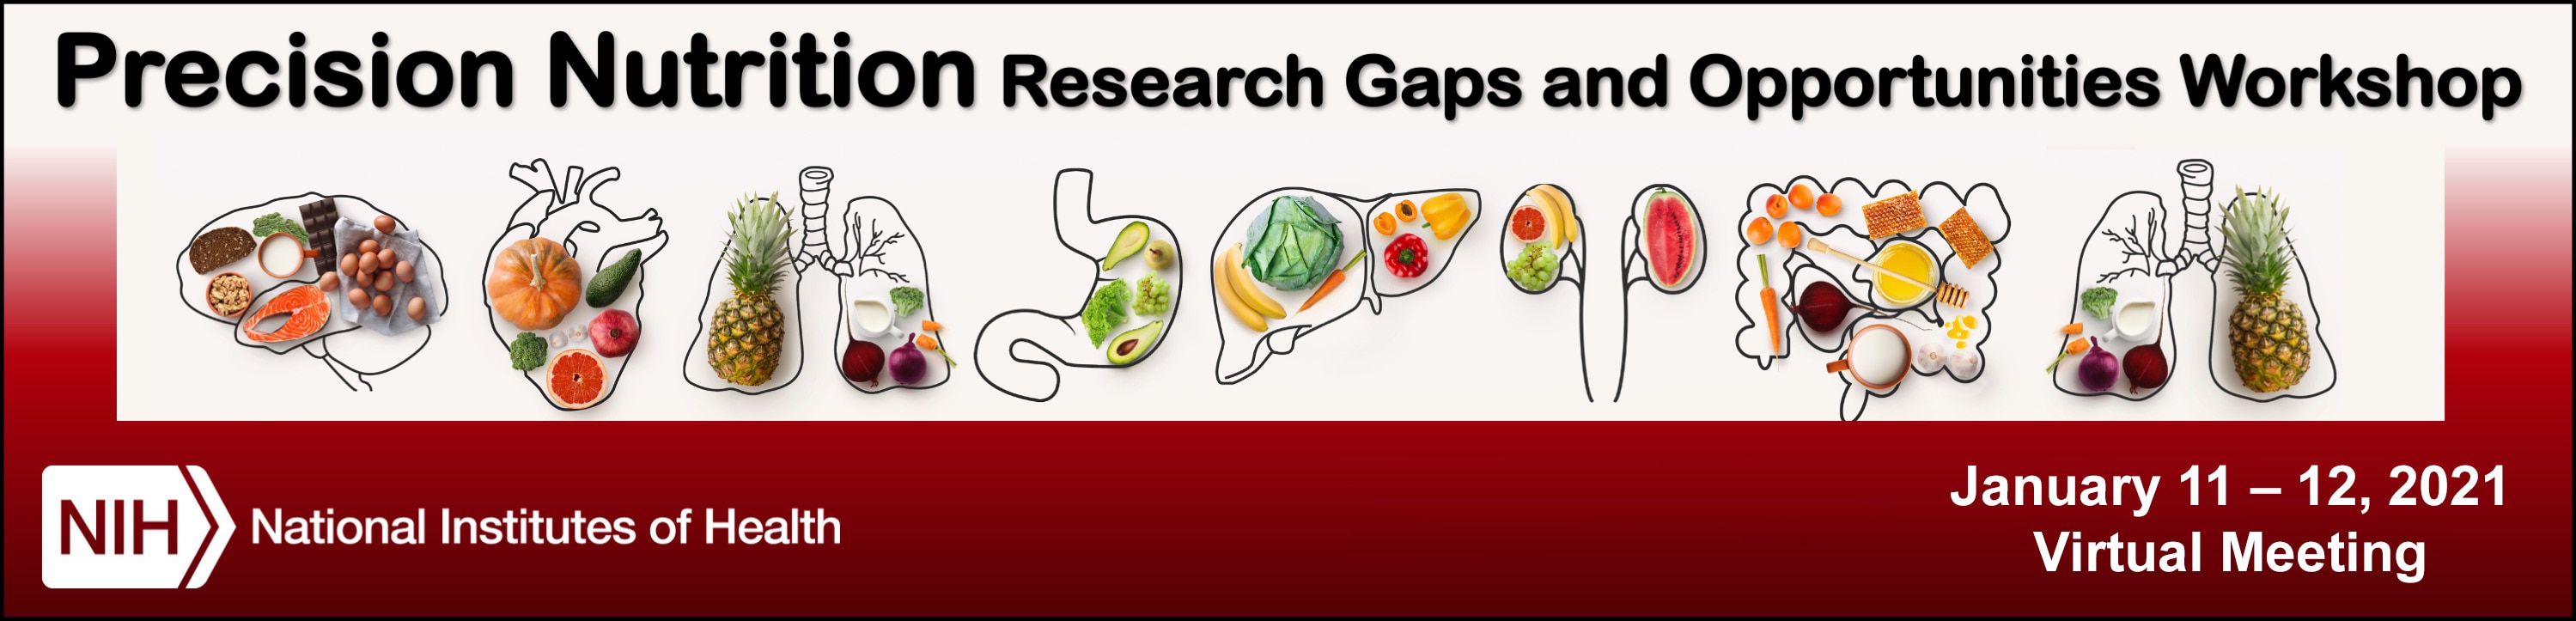 Web banner for the Precision Nutrition Research Gaps and Opportunities Workshop